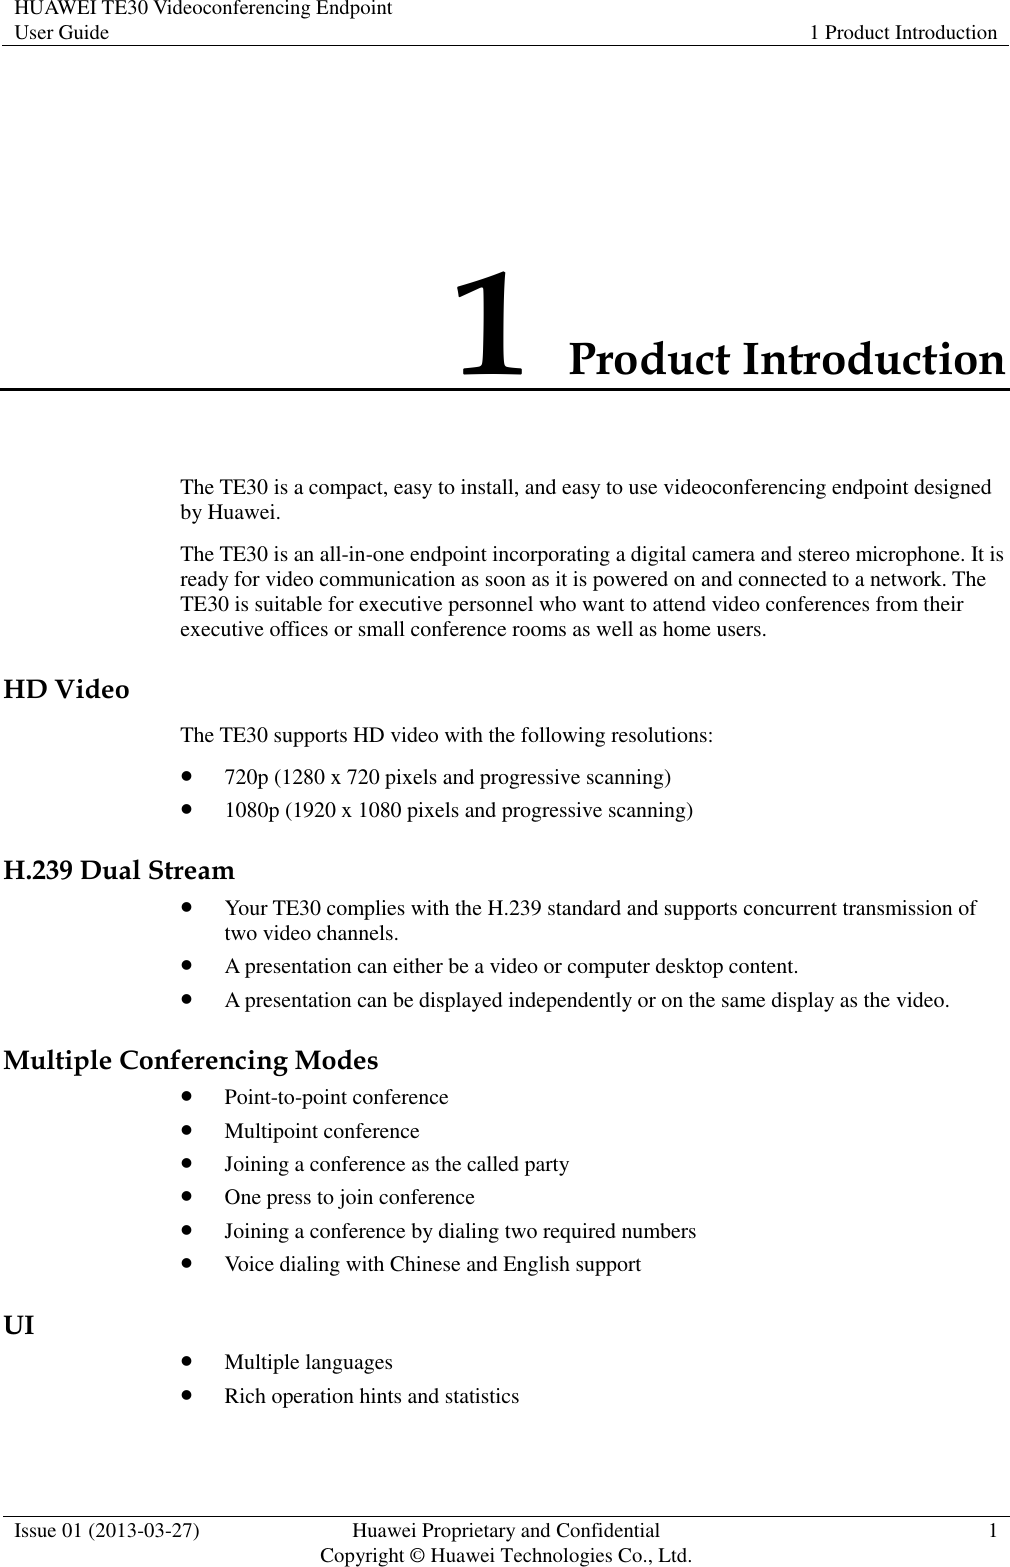 HUAWEI TE30 Videoconferencing Endpoint User Guide 1 Product Introduction  Issue 01 (2013-03-27) Huawei Proprietary and Confidential                                     Copyright © Huawei Technologies Co., Ltd. 1  1 Product Introduction The TE30 is a compact, easy to install, and easy to use videoconferencing endpoint designed by Huawei. The TE30 is an all-in-one endpoint incorporating a digital camera and stereo microphone. It is ready for video communication as soon as it is powered on and connected to a network. The TE30 is suitable for executive personnel who want to attend video conferences from their executive offices or small conference rooms as well as home users. HD Video The TE30 supports HD video with the following resolutions:  720p (1280 x 720 pixels and progressive scanning)  1080p (1920 x 1080 pixels and progressive scanning) H.239 Dual Stream  Your TE30 complies with the H.239 standard and supports concurrent transmission of two video channels.  A presentation can either be a video or computer desktop content.  A presentation can be displayed independently or on the same display as the video. Multiple Conferencing Modes  Point-to-point conference  Multipoint conference  Joining a conference as the called party  One press to join conference  Joining a conference by dialing two required numbers  Voice dialing with Chinese and English support UI  Multiple languages  Rich operation hints and statistics 